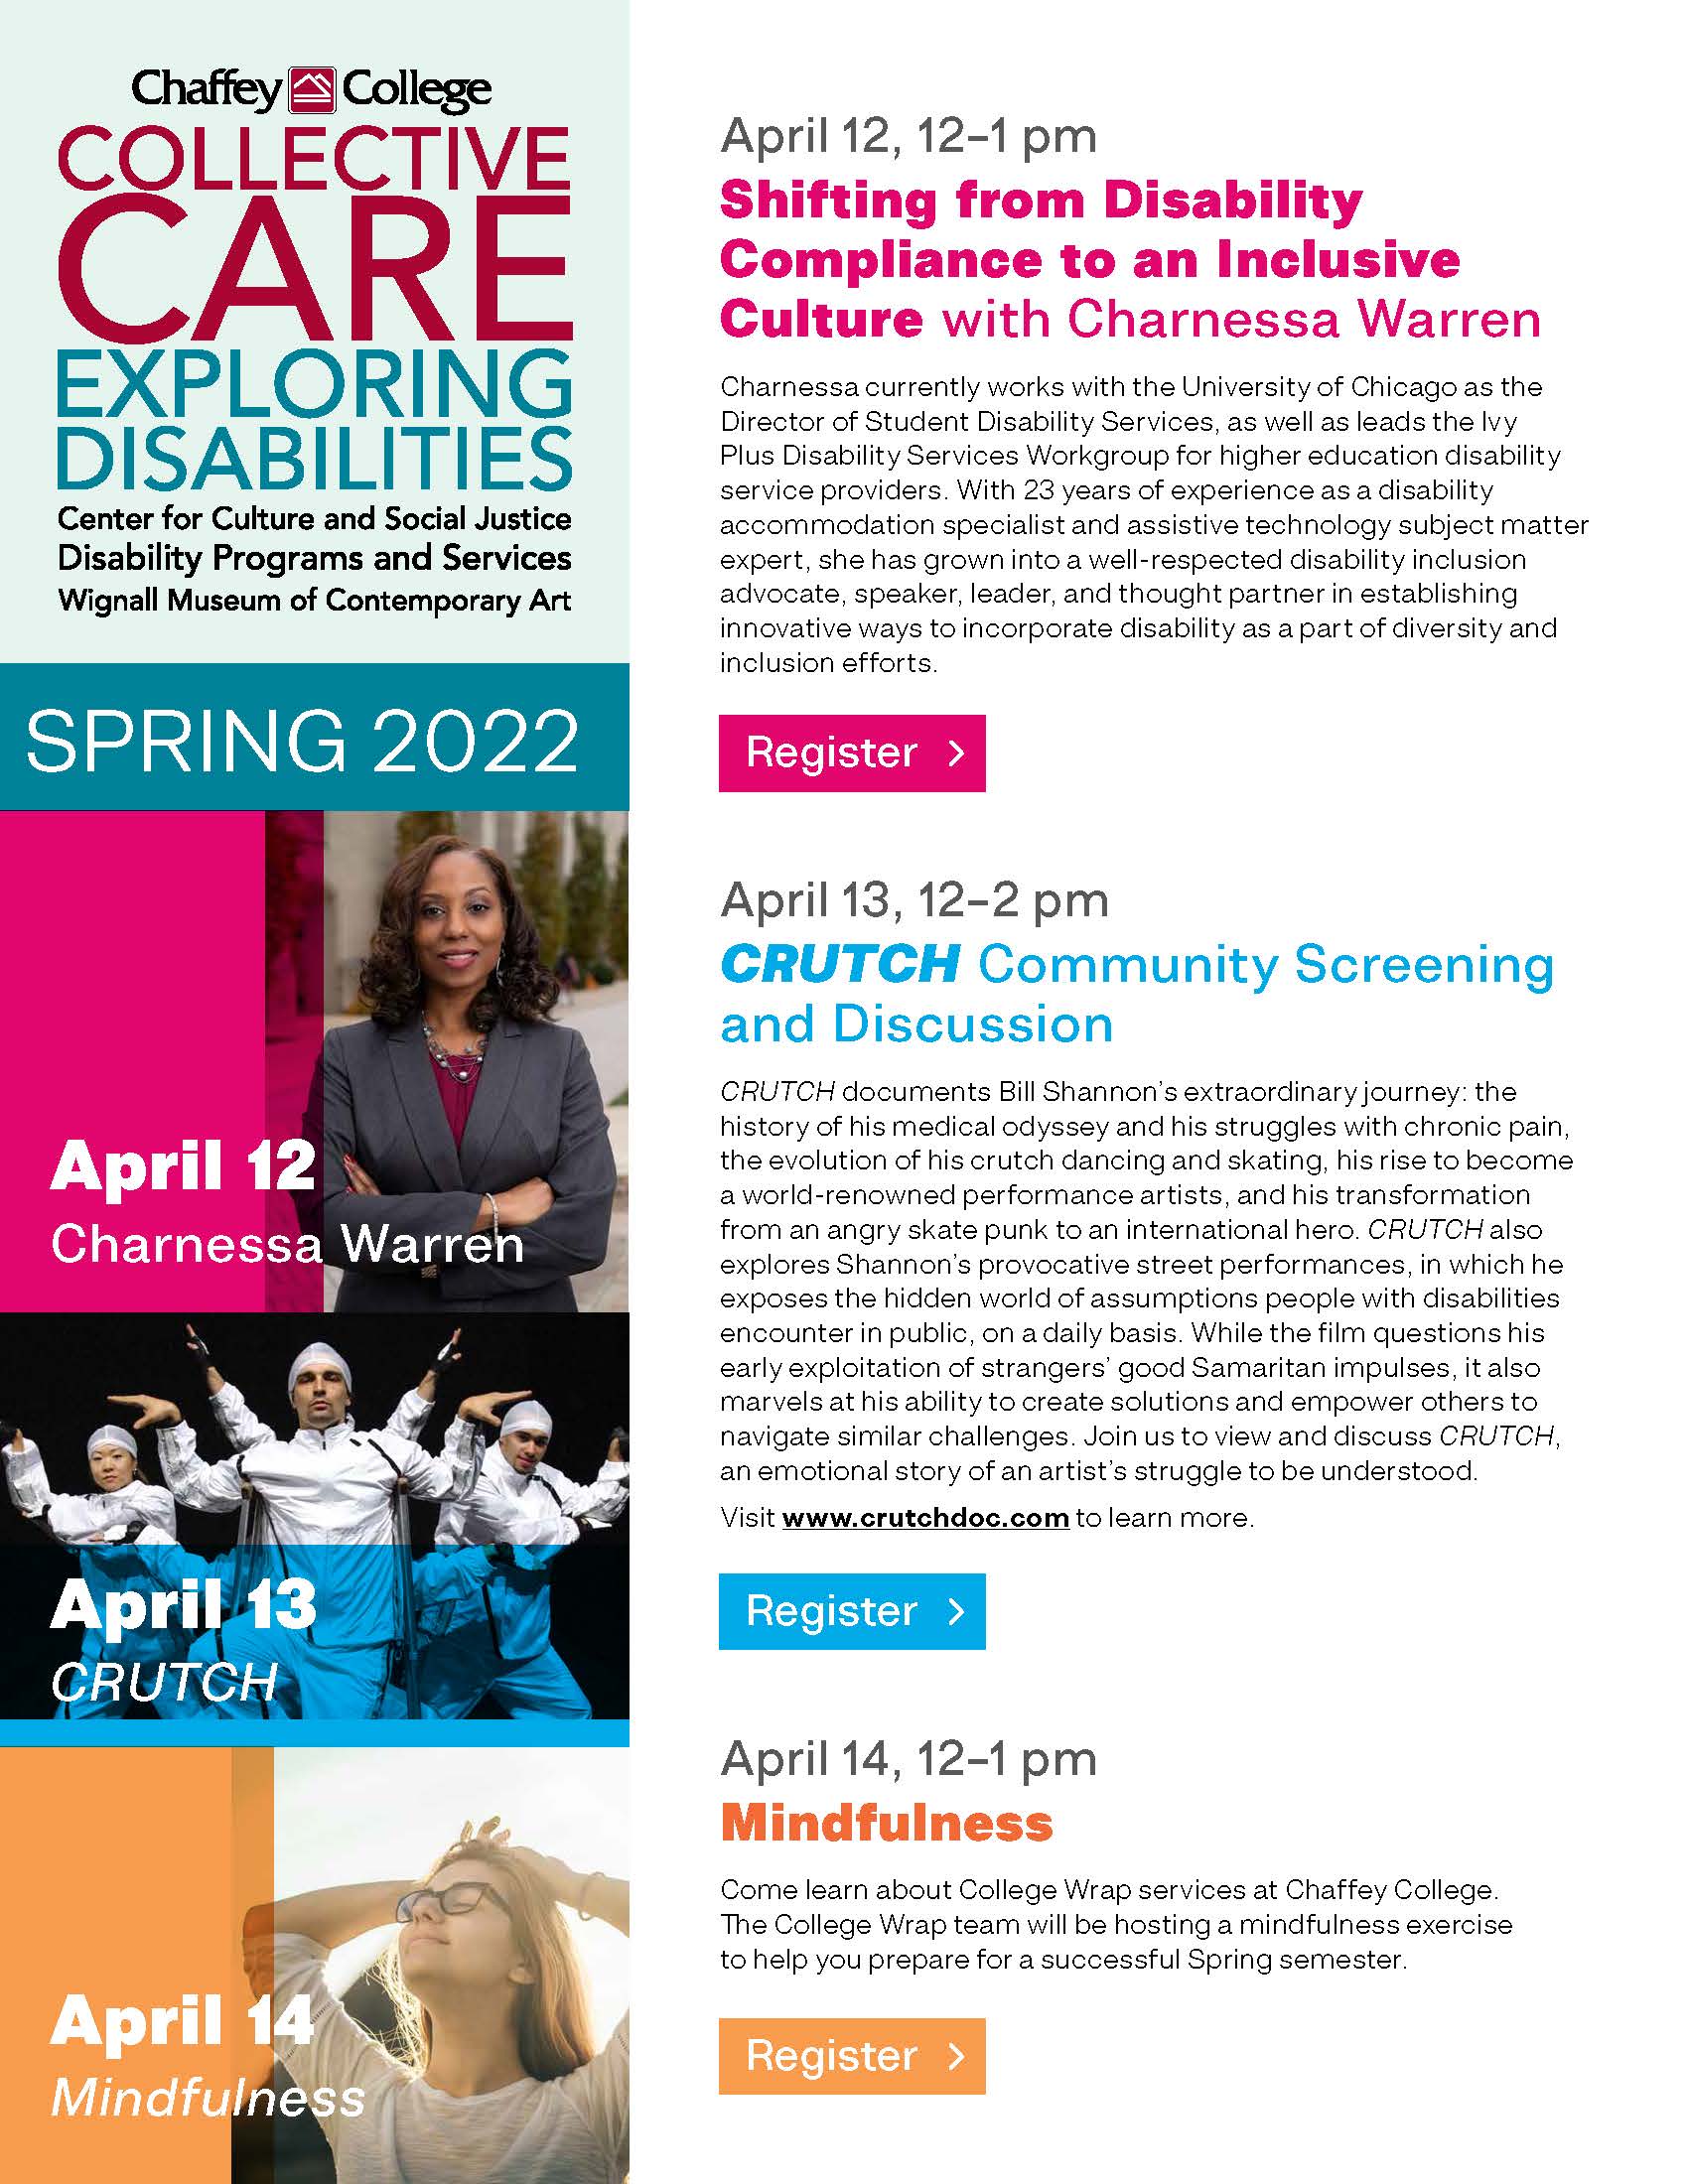 Collective Care: Exploring Disabilities presents Shifting from Disability Compliance to an Inclusive Culture